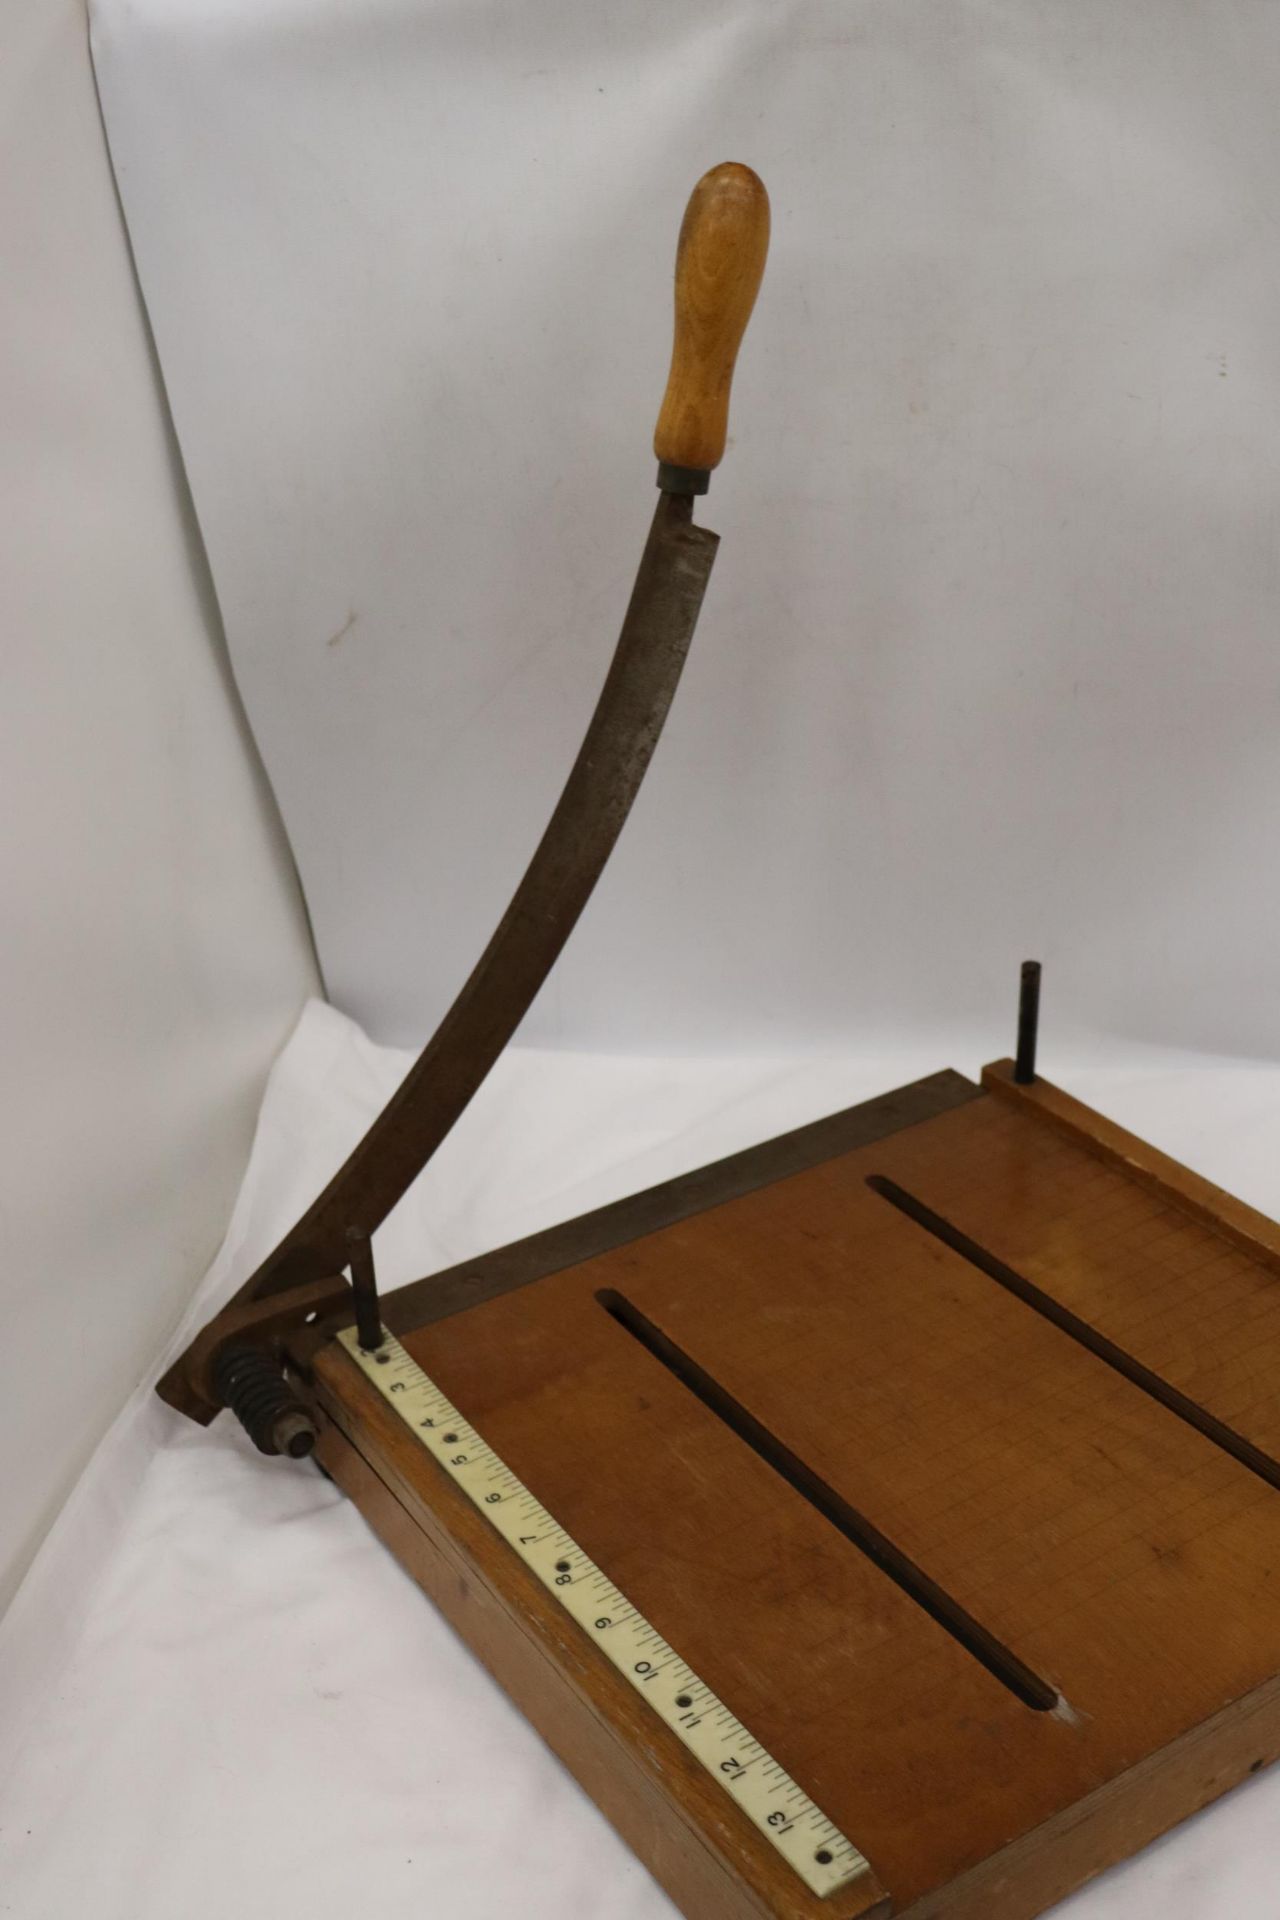 A VINTAGE WOODEN GUILLOTINE - Image 4 of 5